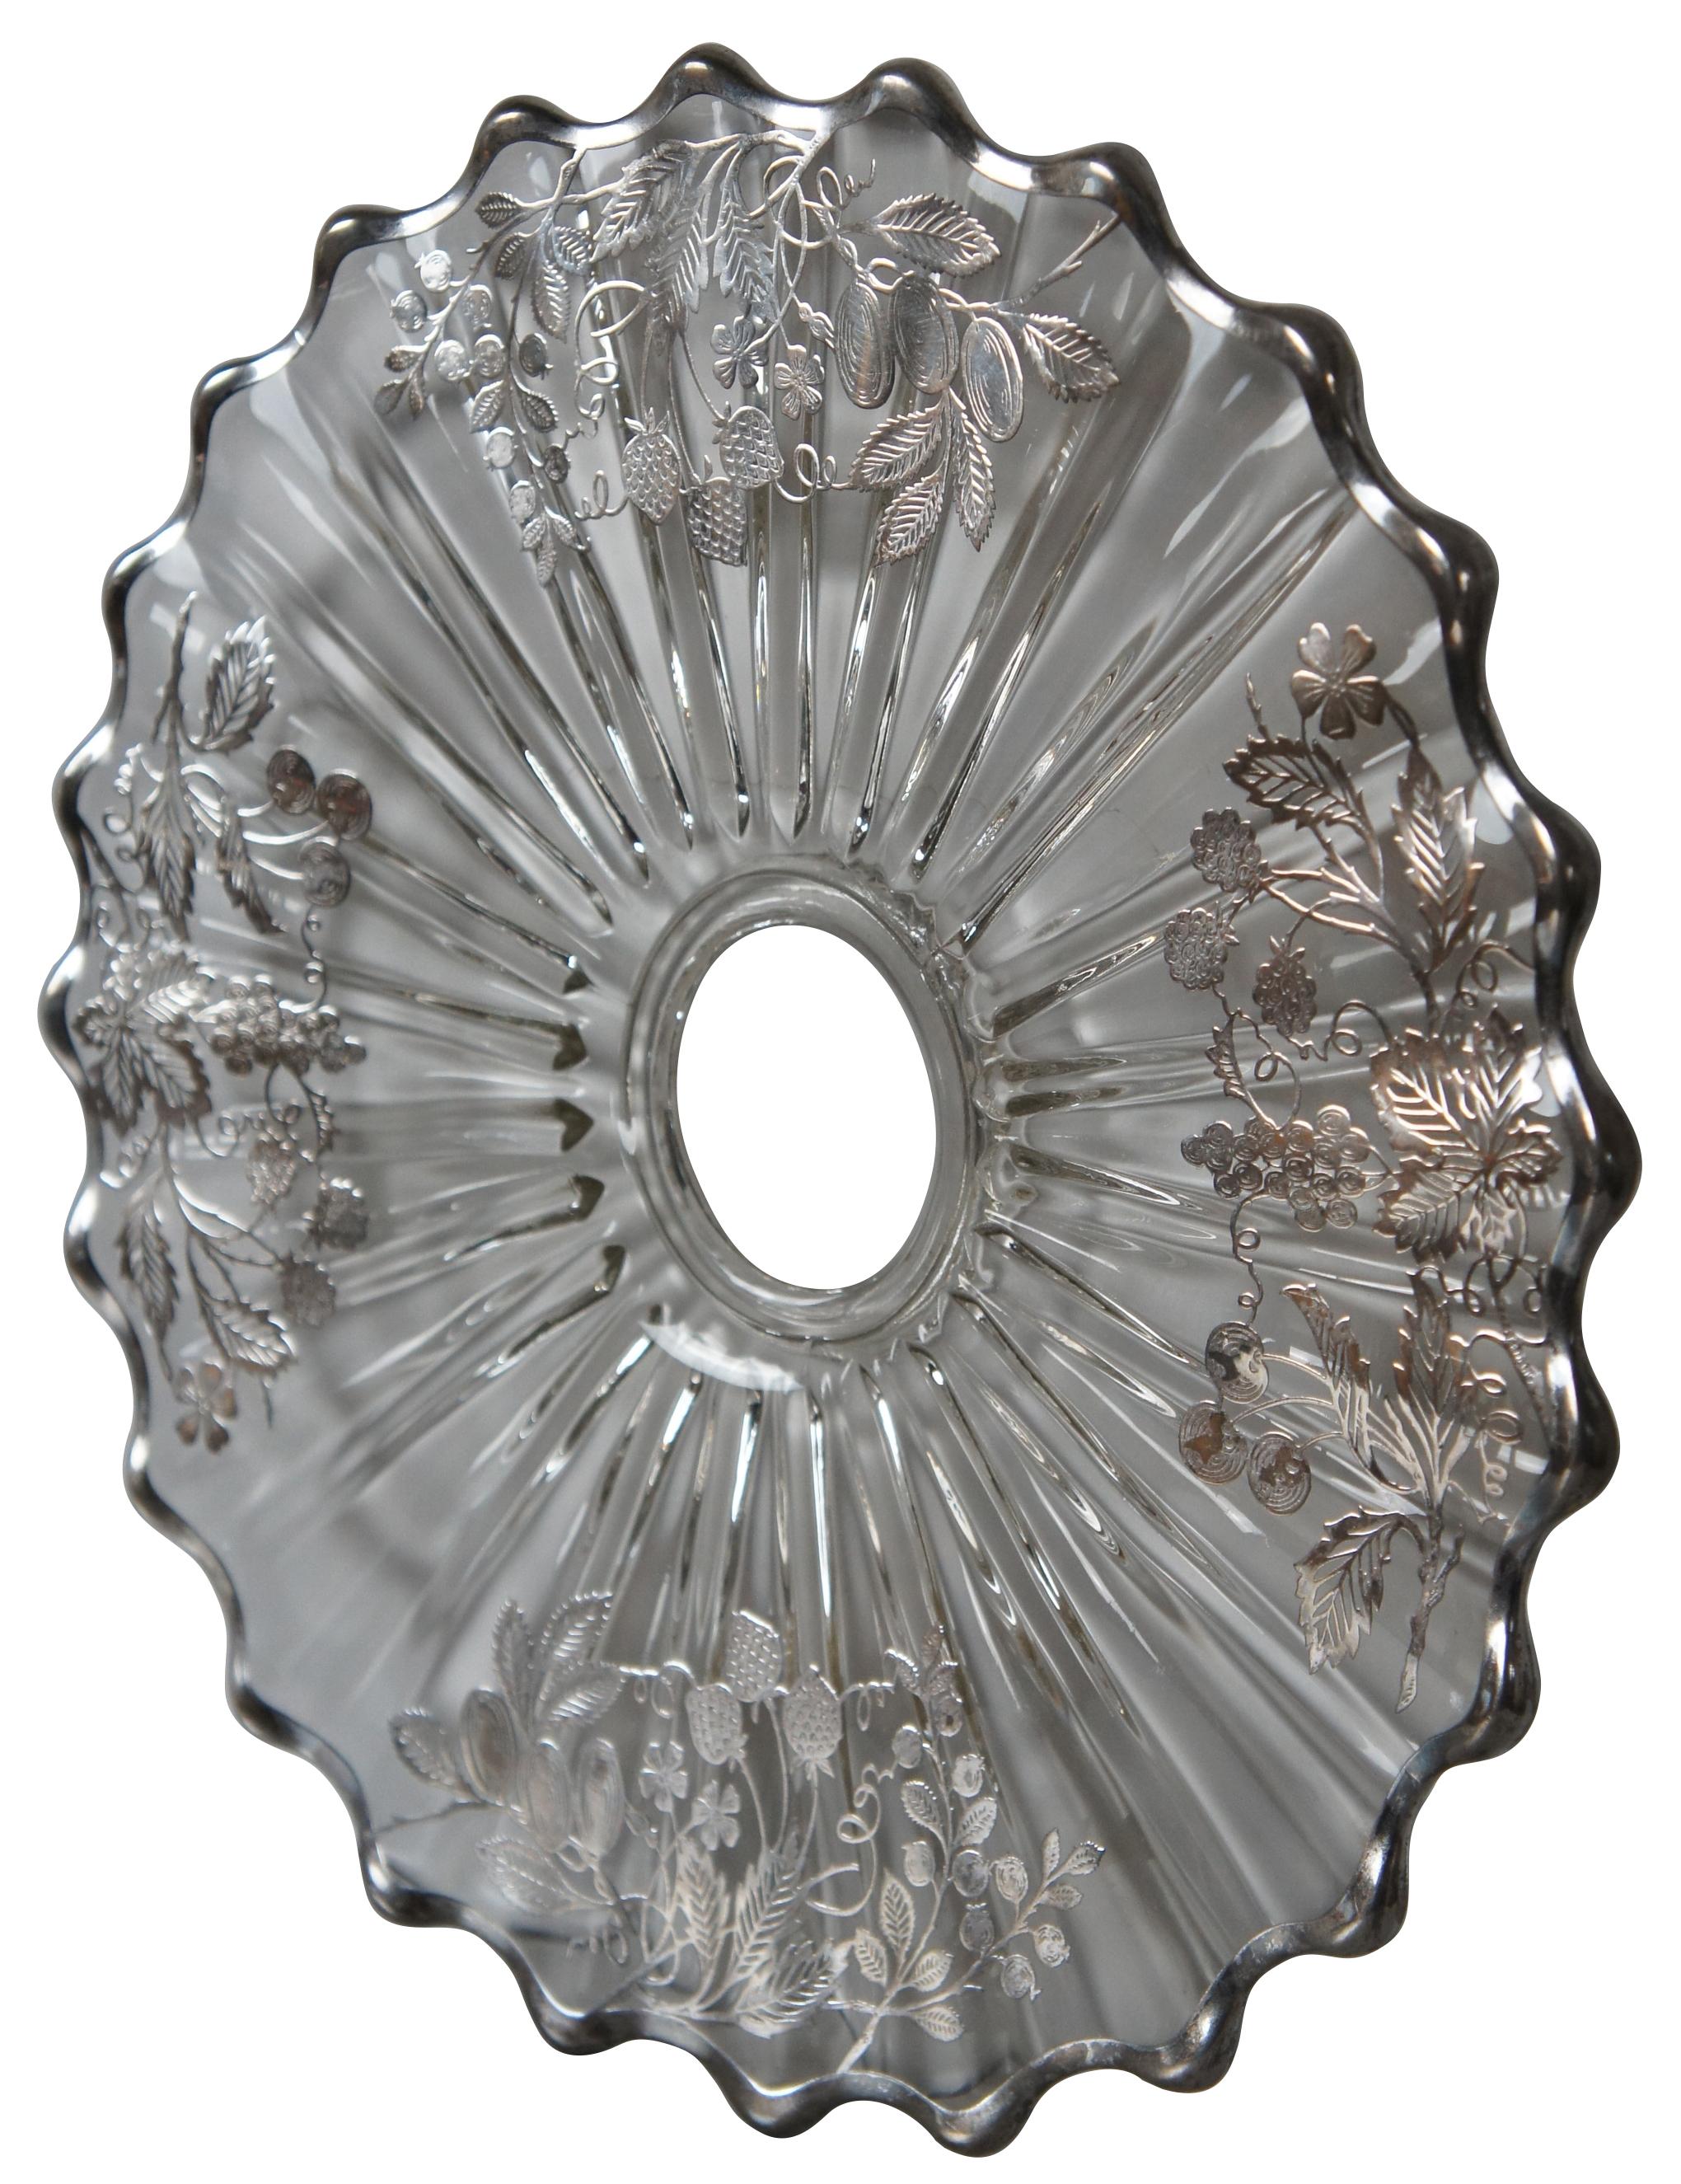 Vintage round scalloped glass and sterling silver .925 overlay platter with alternating designs of grapes / strawberries / florals and leaves. Measures: 15